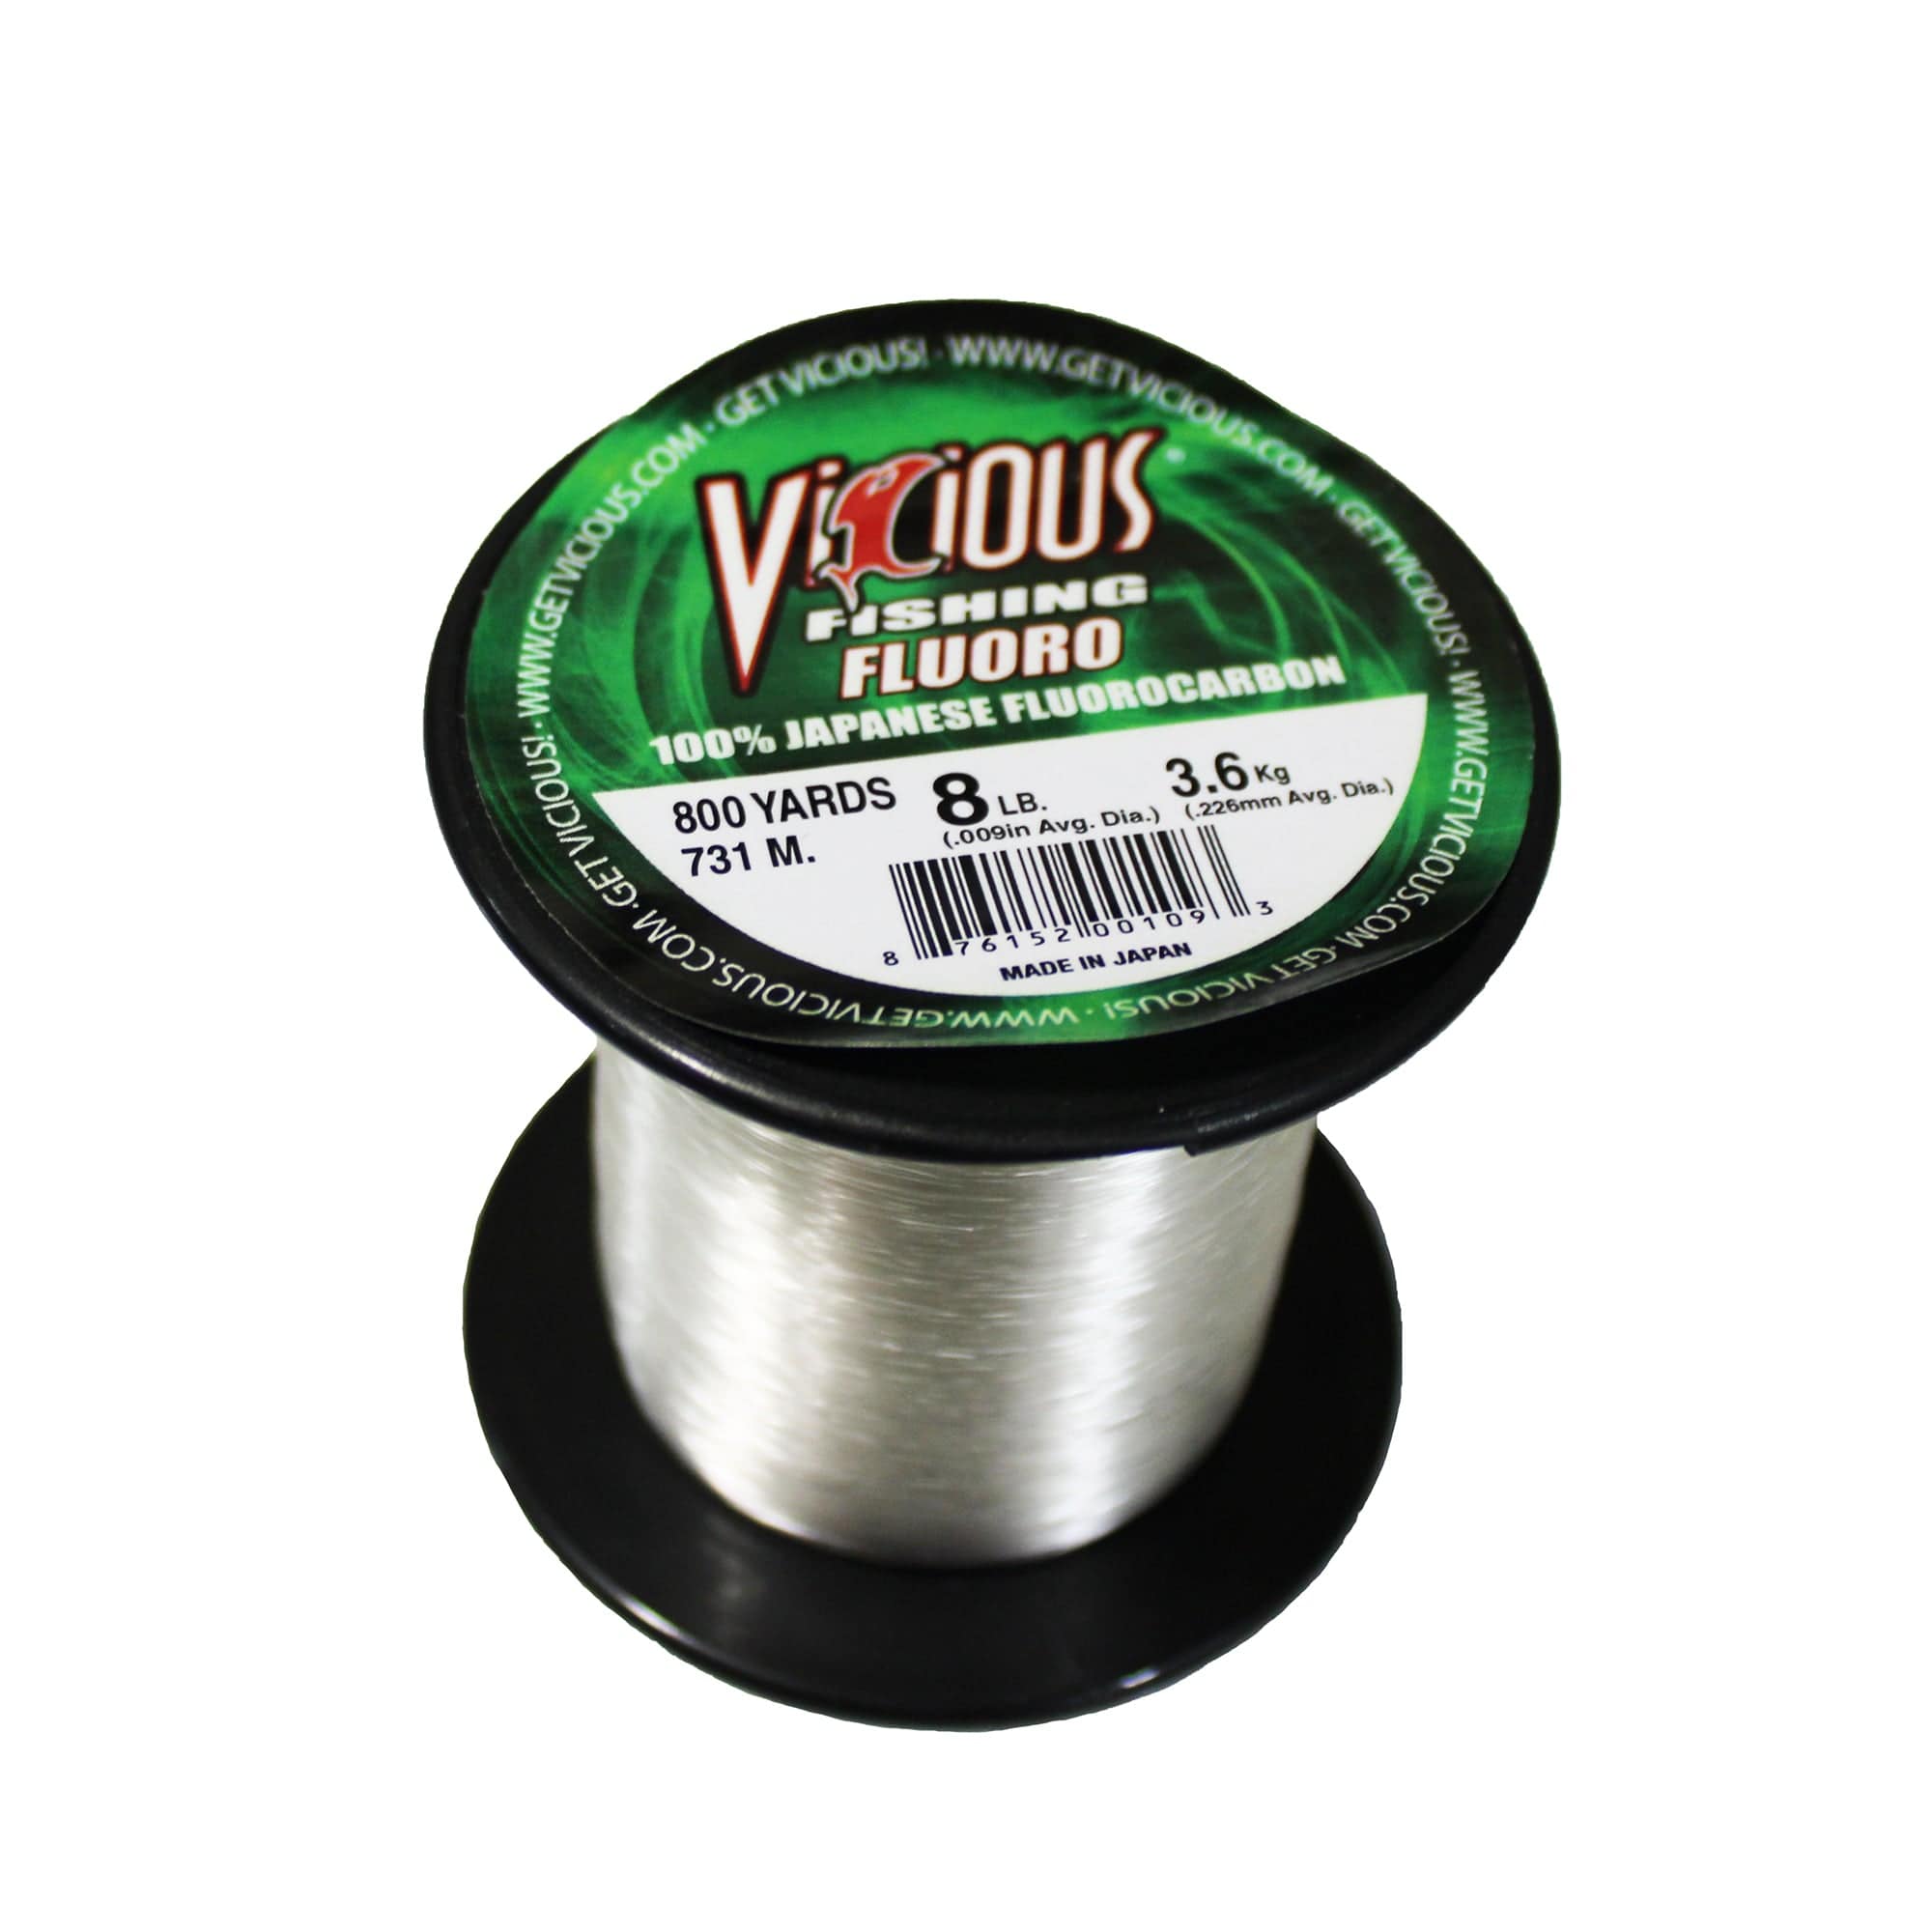 Vicious Fishing 100% Fluorocarbon, 8lb Test, 800 Yards, Clear